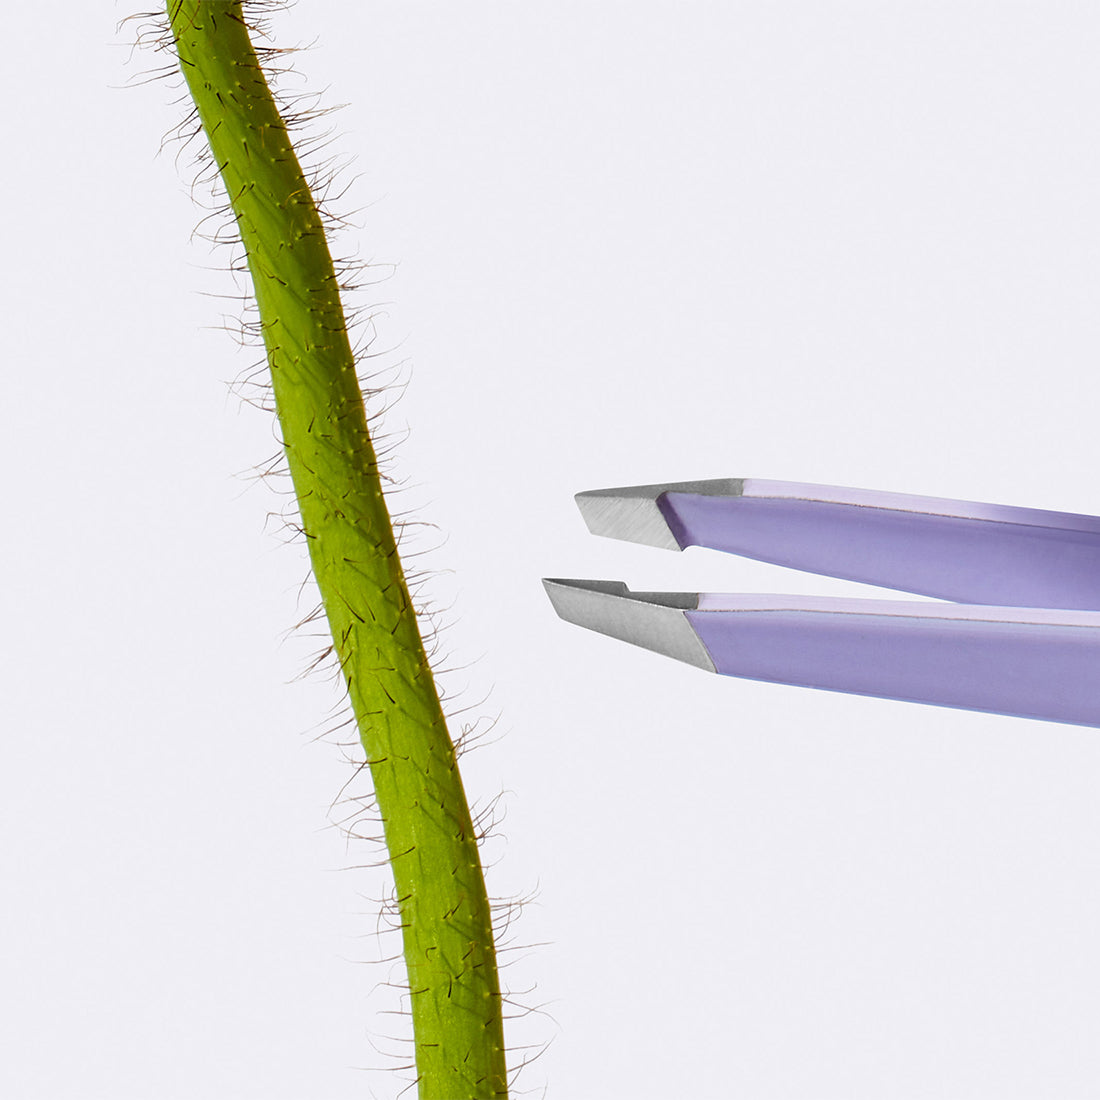 Close up of Flamingo lilac Tweezers reaching towards a flower stem with fine, peach-fuzz looking texture